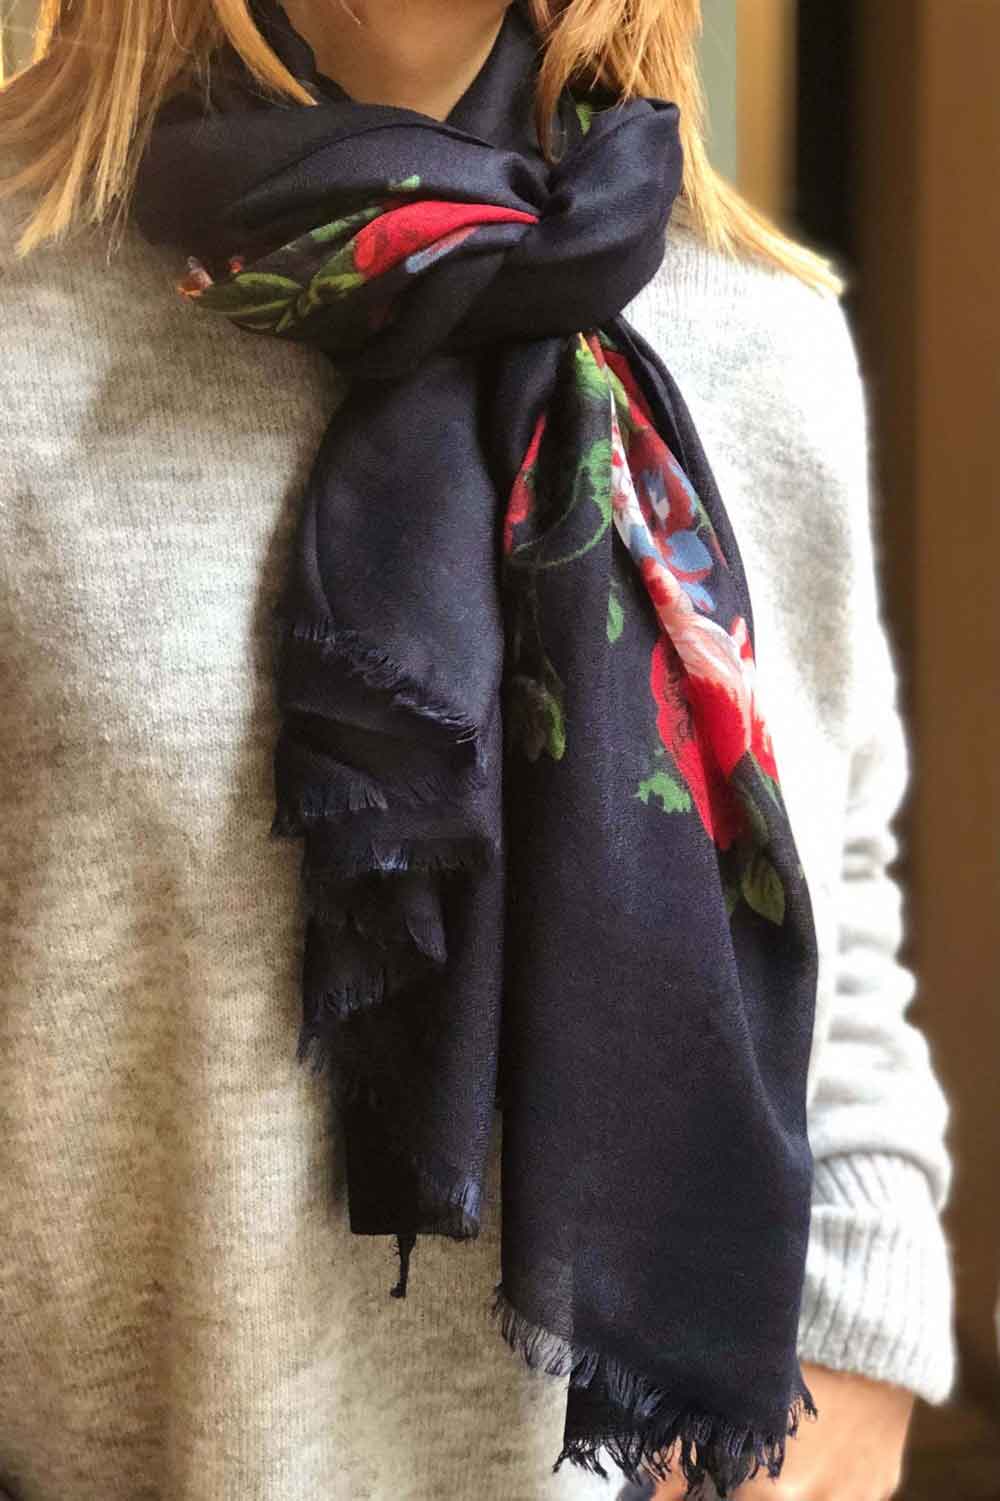 100% ORGANIC COTTON LARGE Dark Scarf, Spring Autumn Scarf, Best Gift for Women, Navy Blue and Floral with Softly Frayed Edges